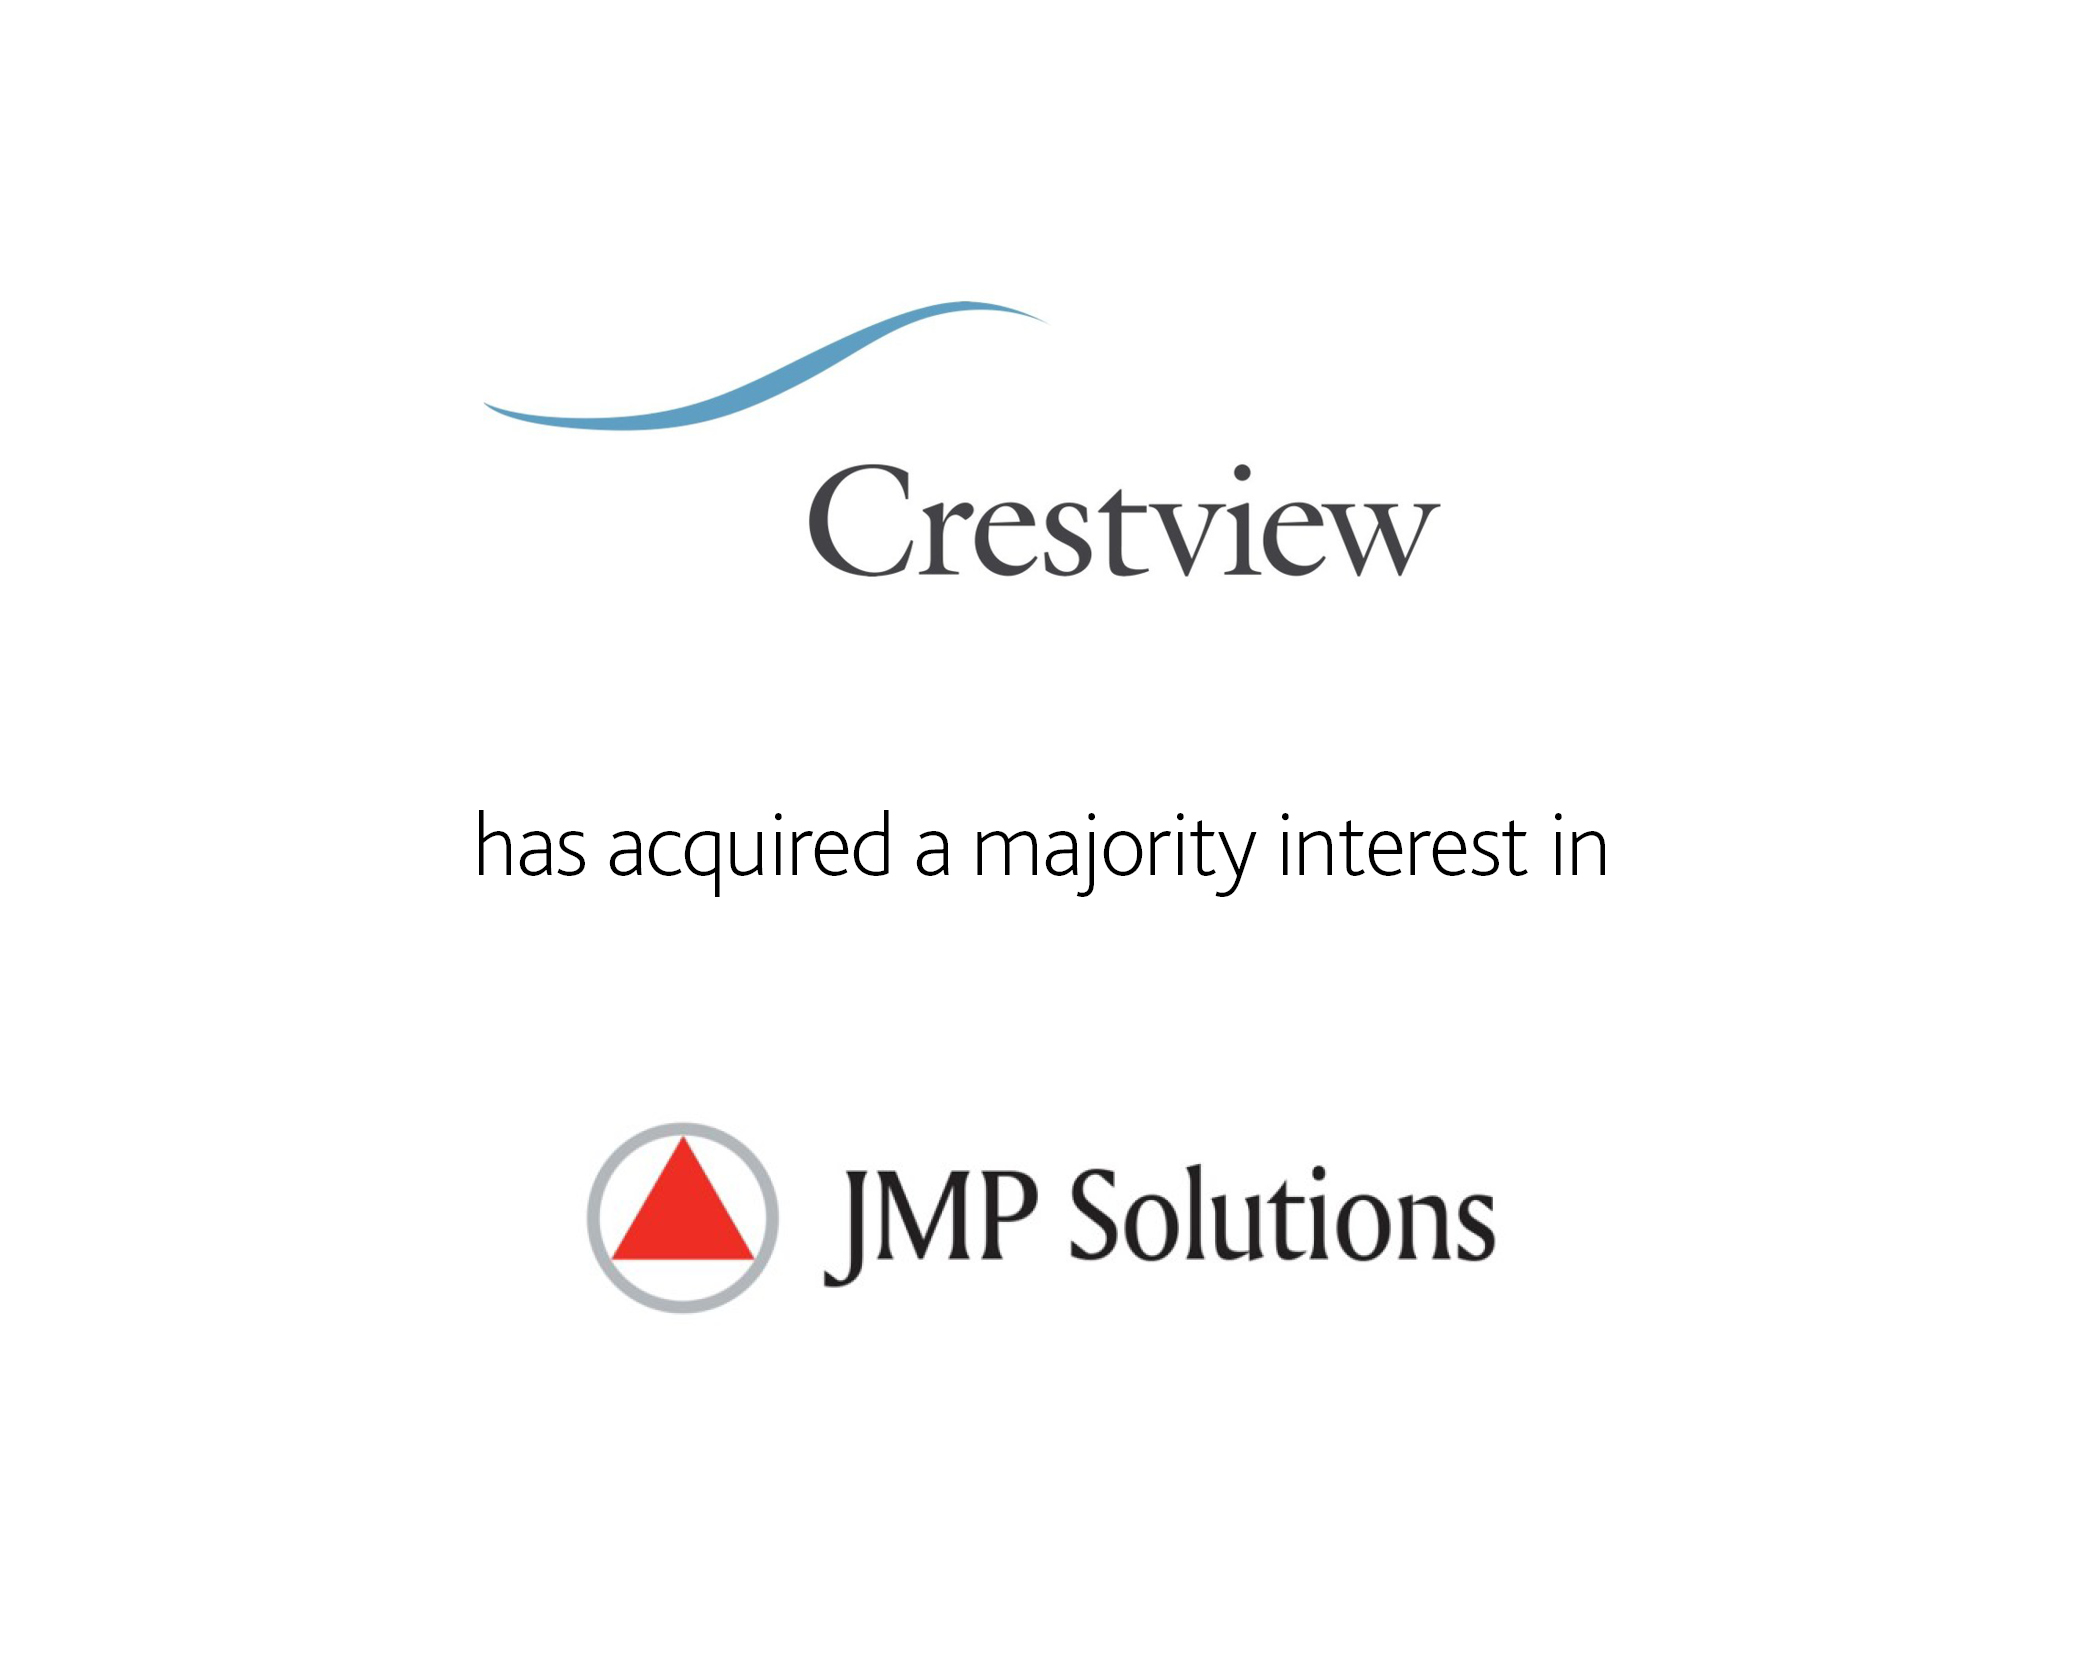 Crestview Partners has acquired a majority interest in JMP Solutions 